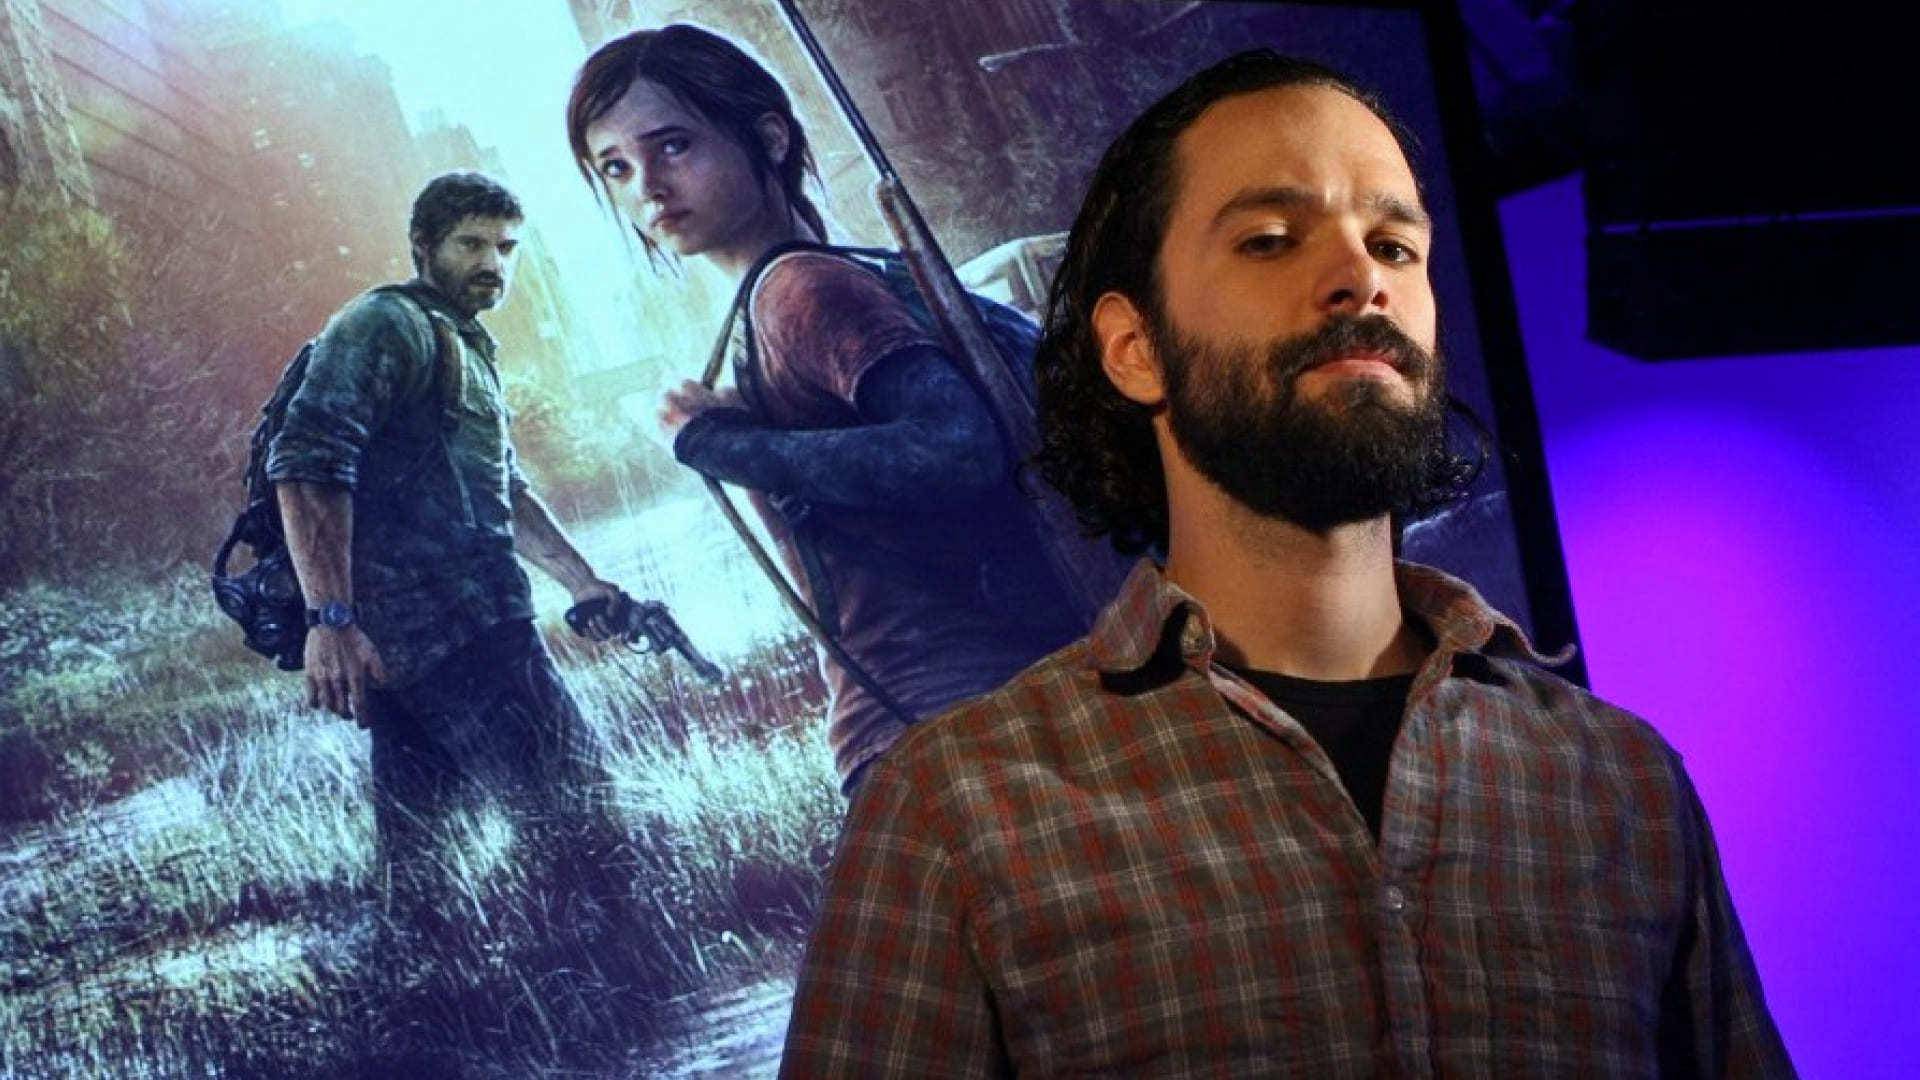 Druckmann Set The Story Straight About 'Misleading' Sony Quote